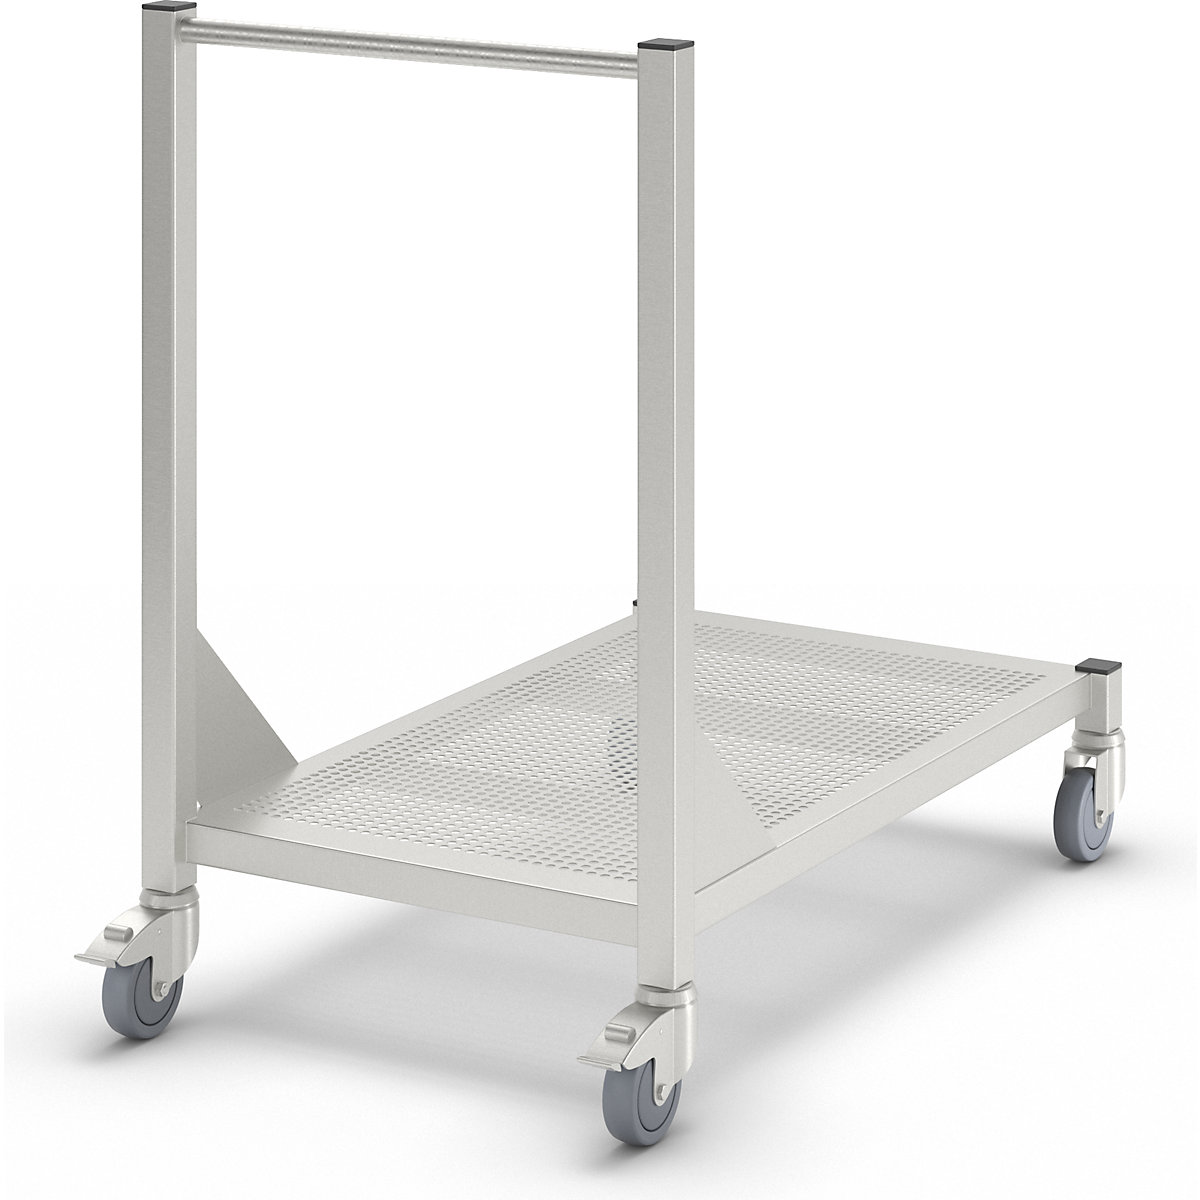 Mobile cleanroom table